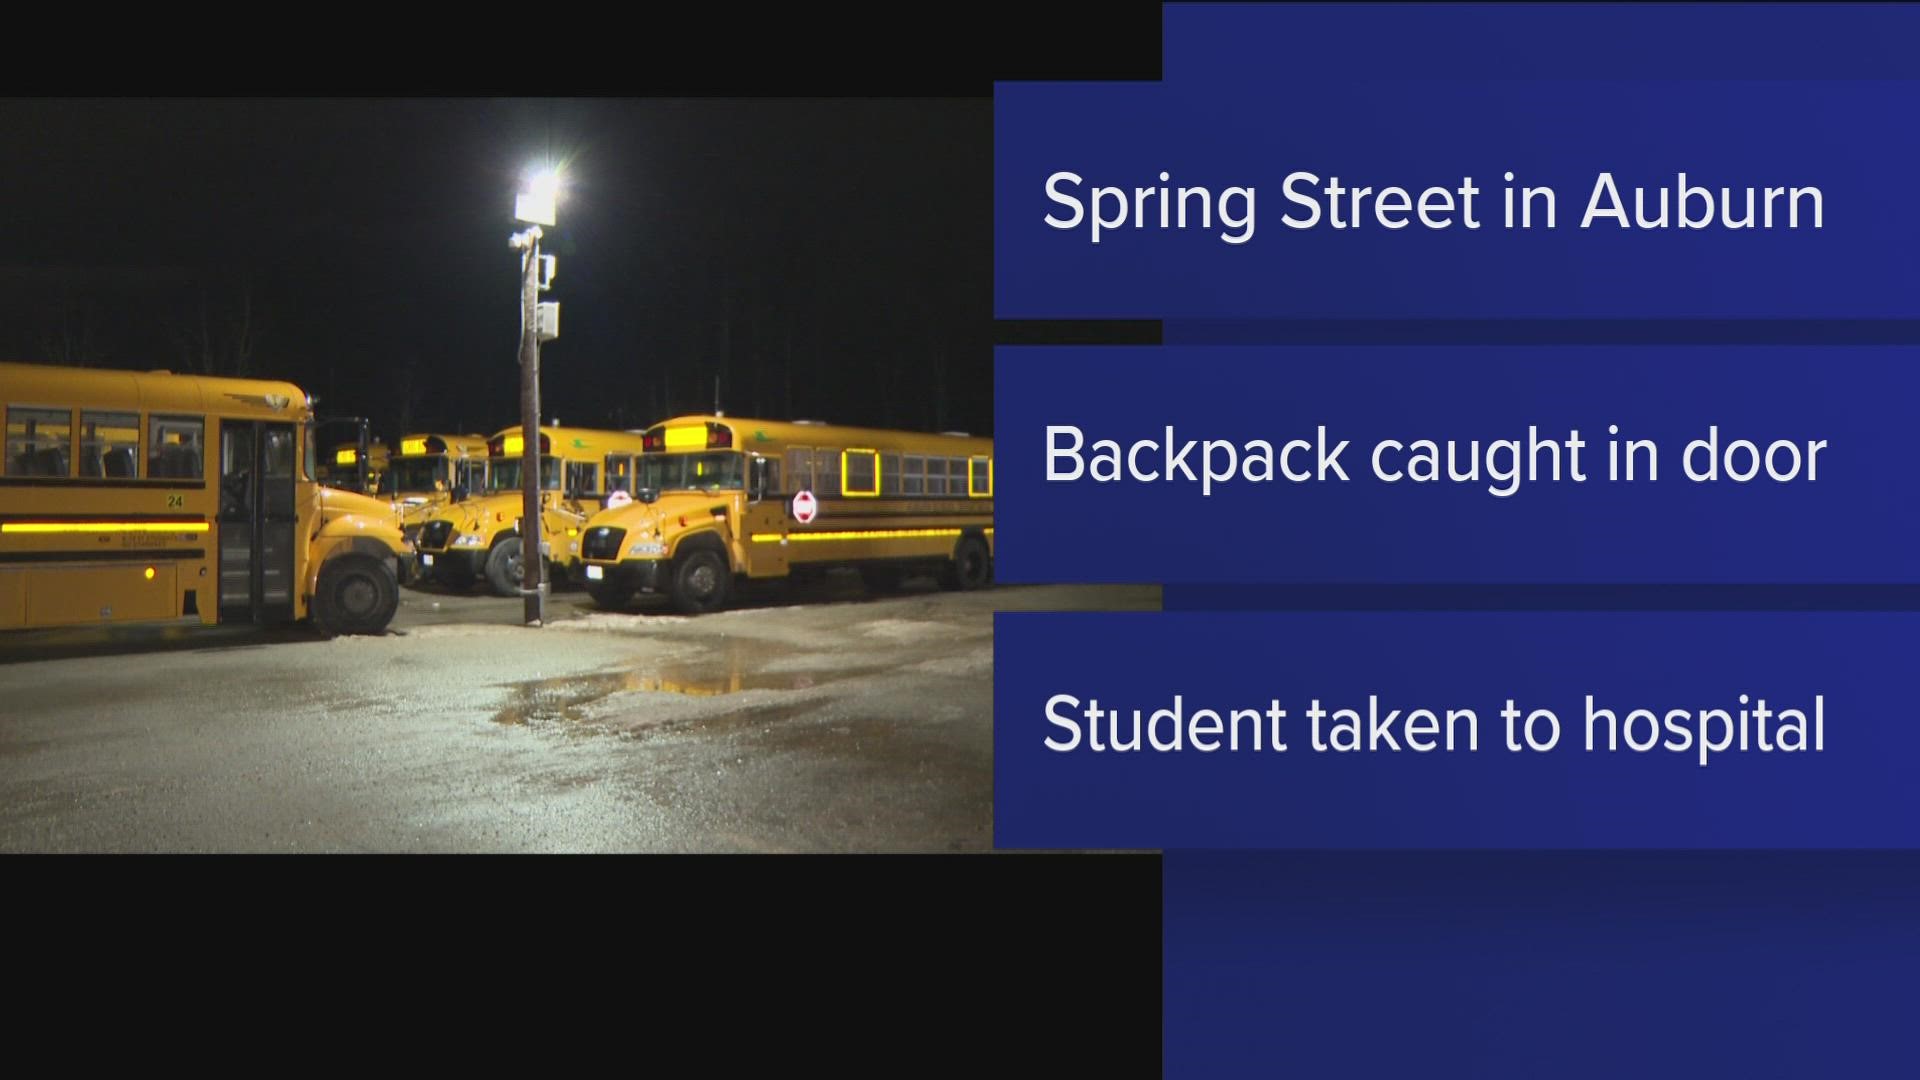 The student got his backpack caught in the door and was dragged on Spring Street, according to a letter posted on Friday.